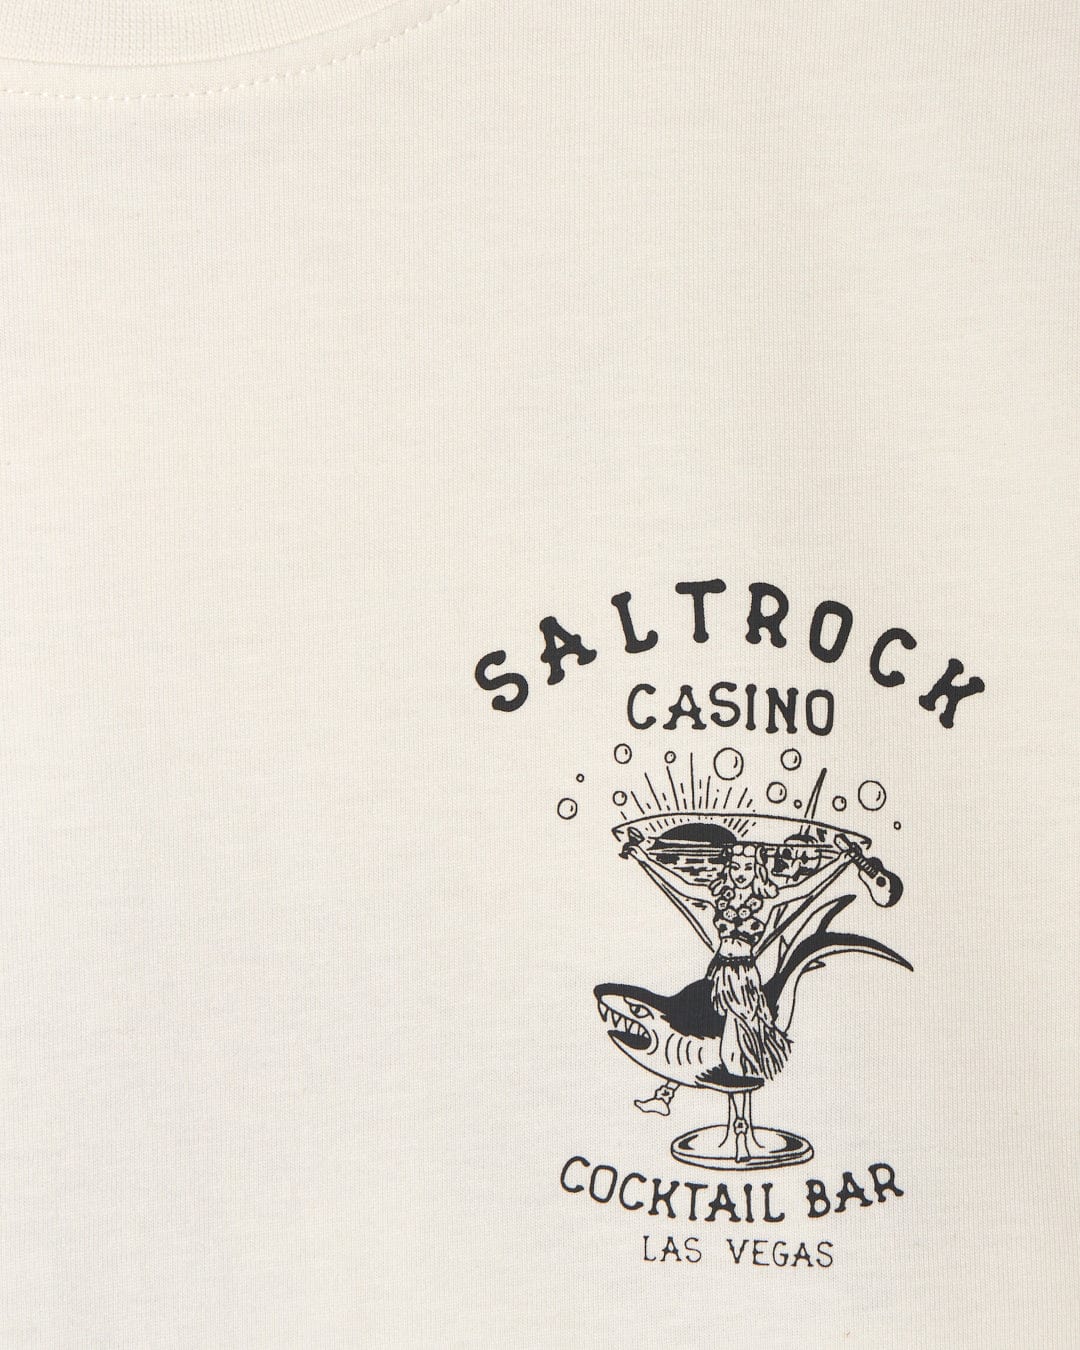 Graphic print of "Vegas Cocktail casino cocktail bar Las Vegas" on a beige fabric background with Saltrock branding and a crew neckline.